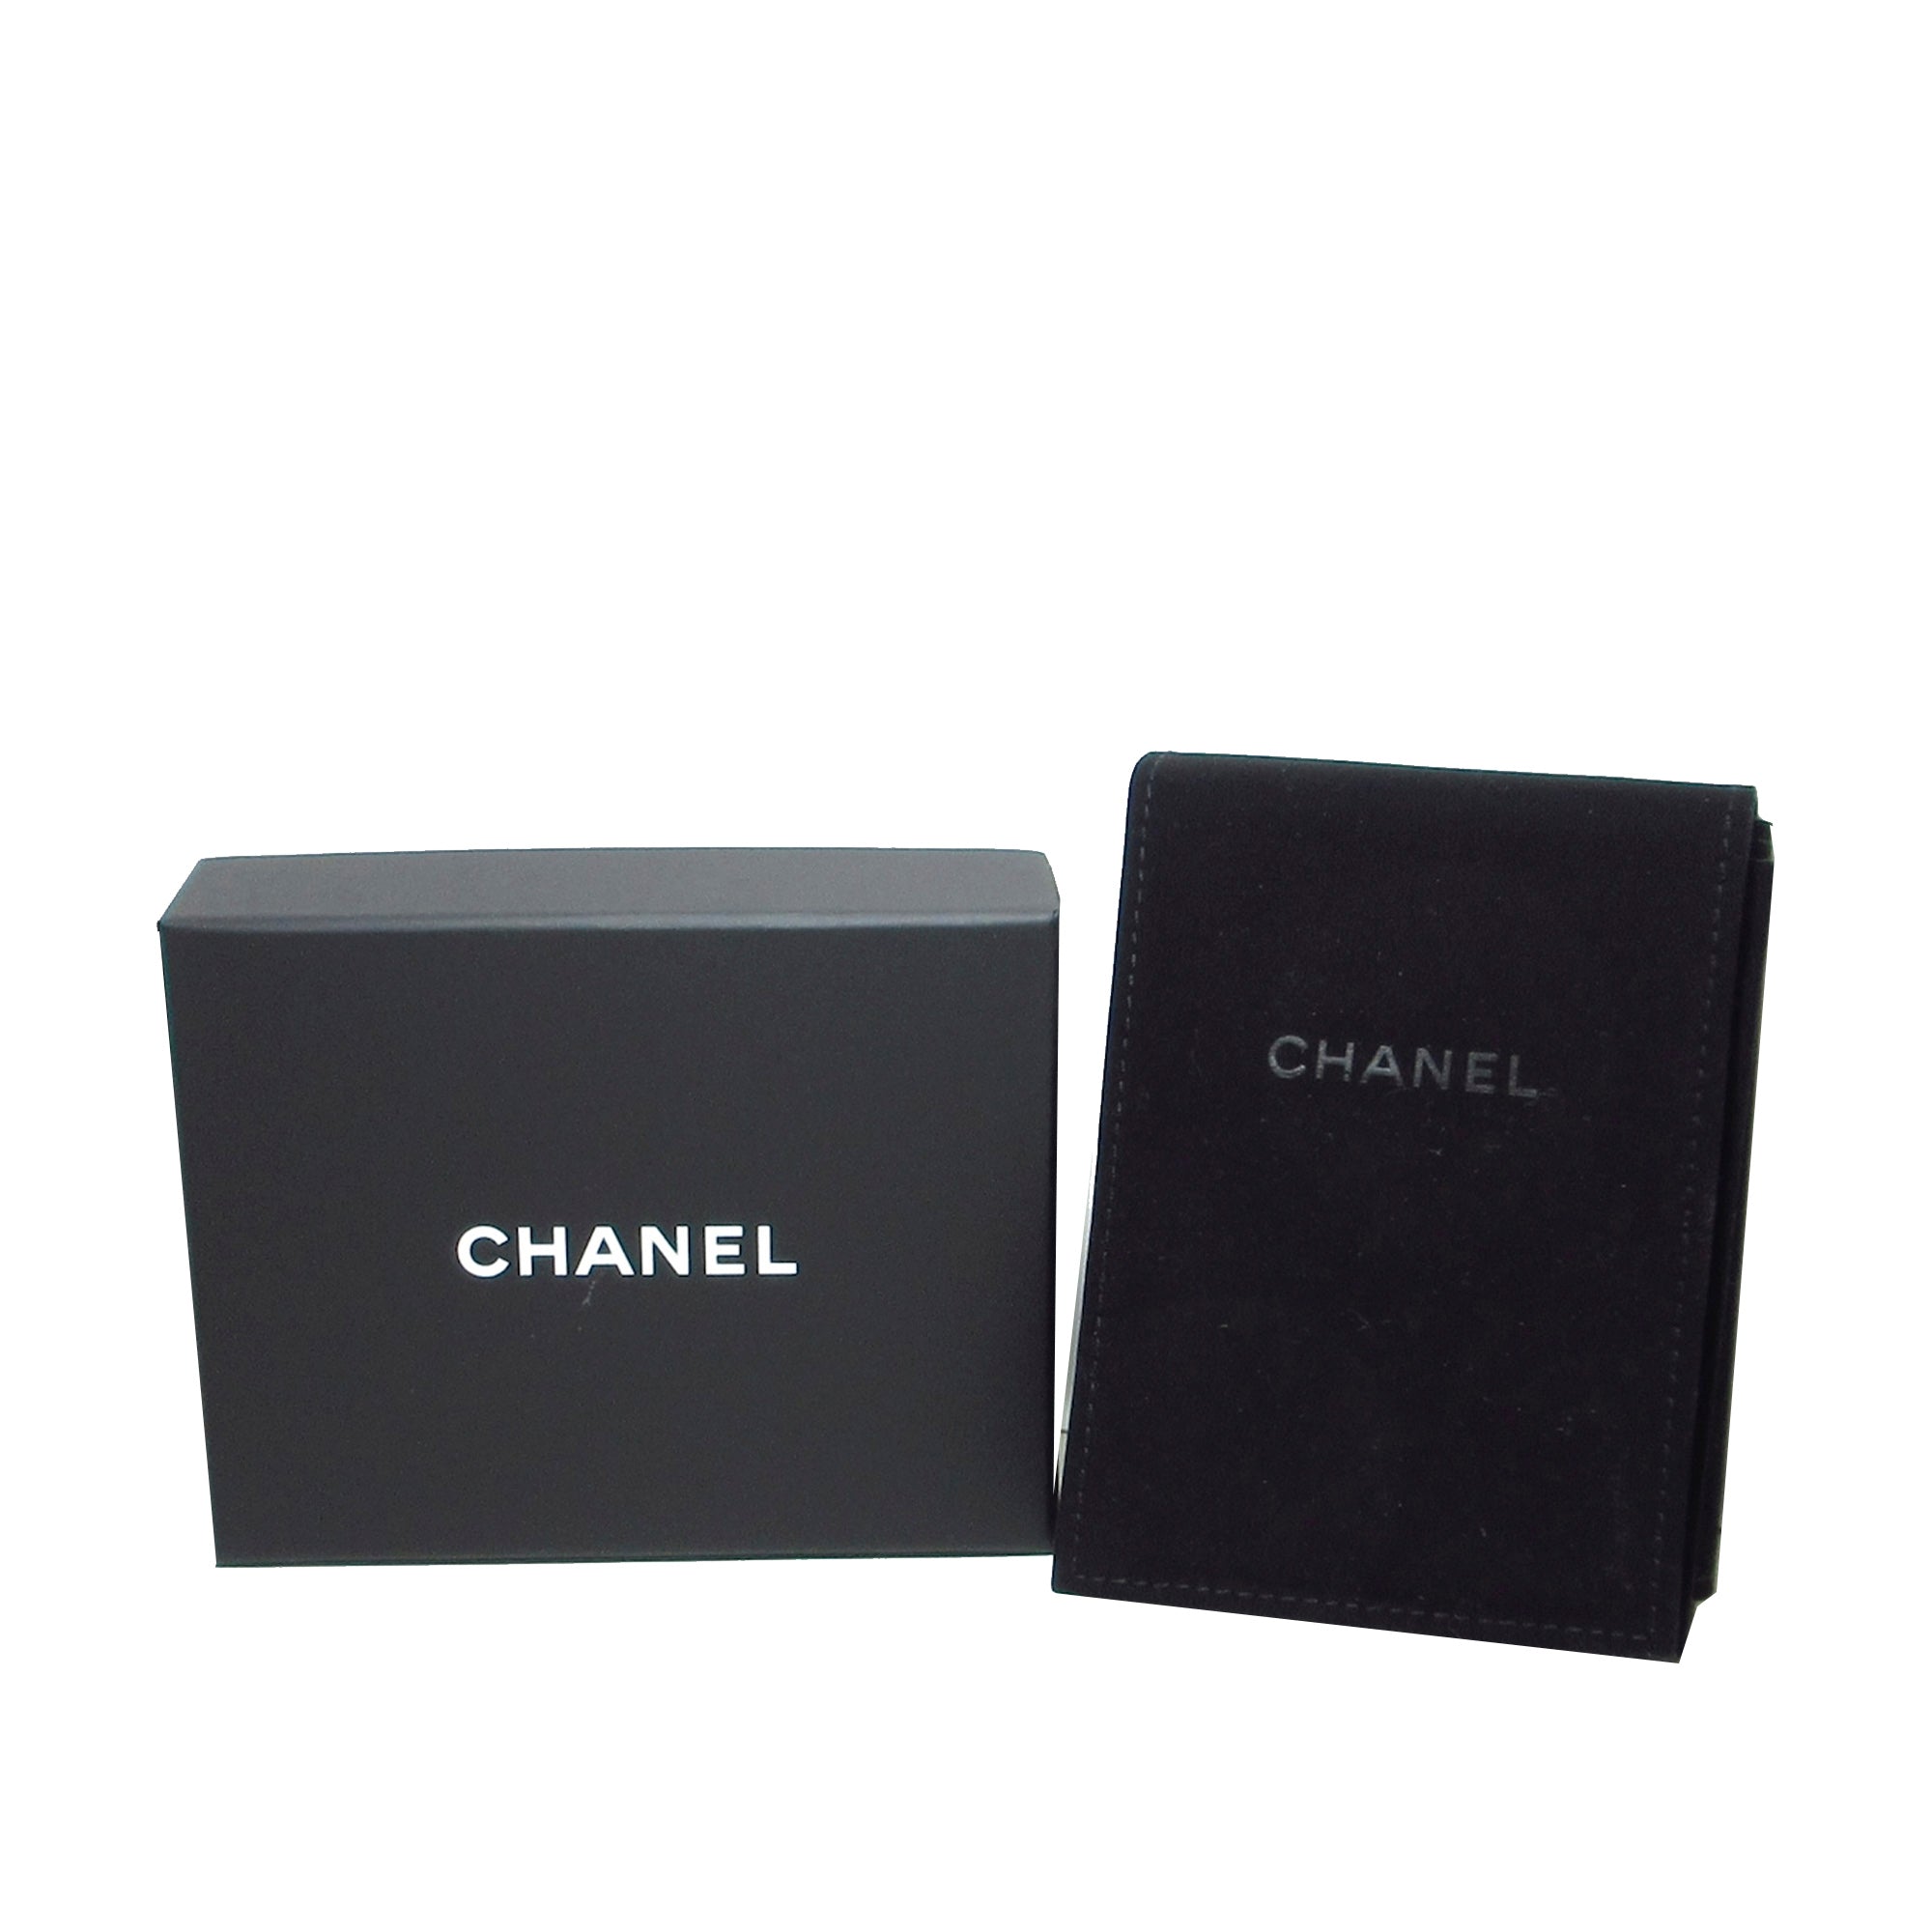 2001 Chanel Vintage Baguette Rhinestone Collection